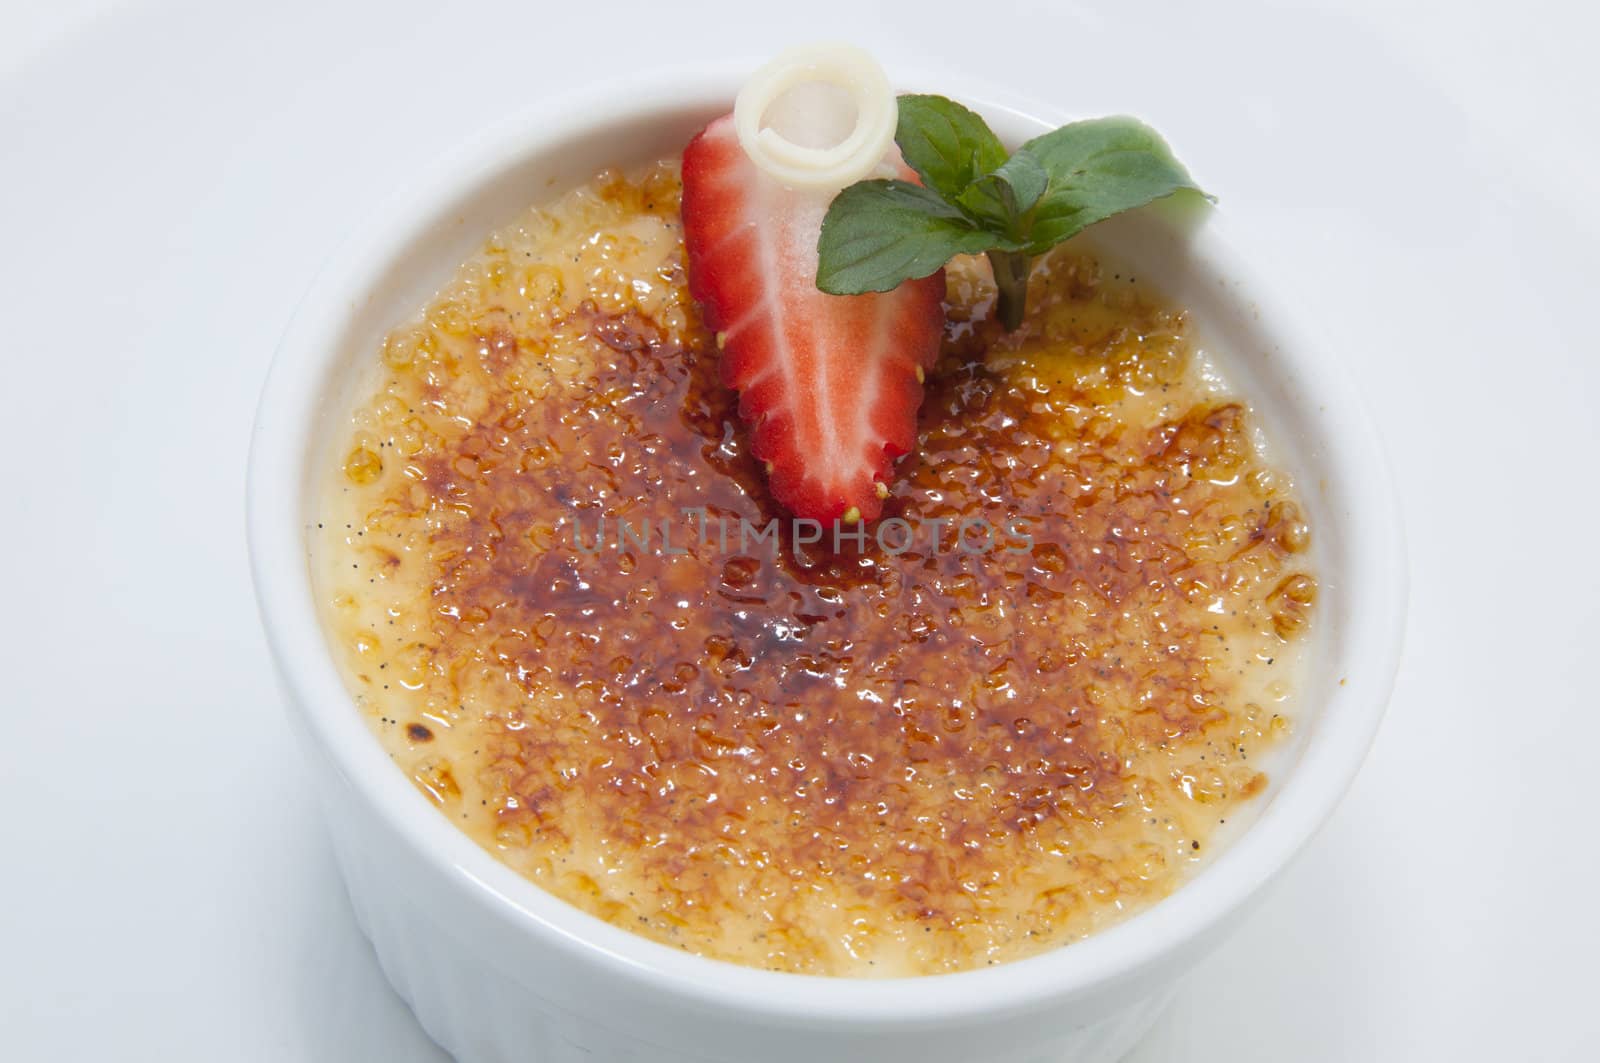 portion of the cream brulee on a white background